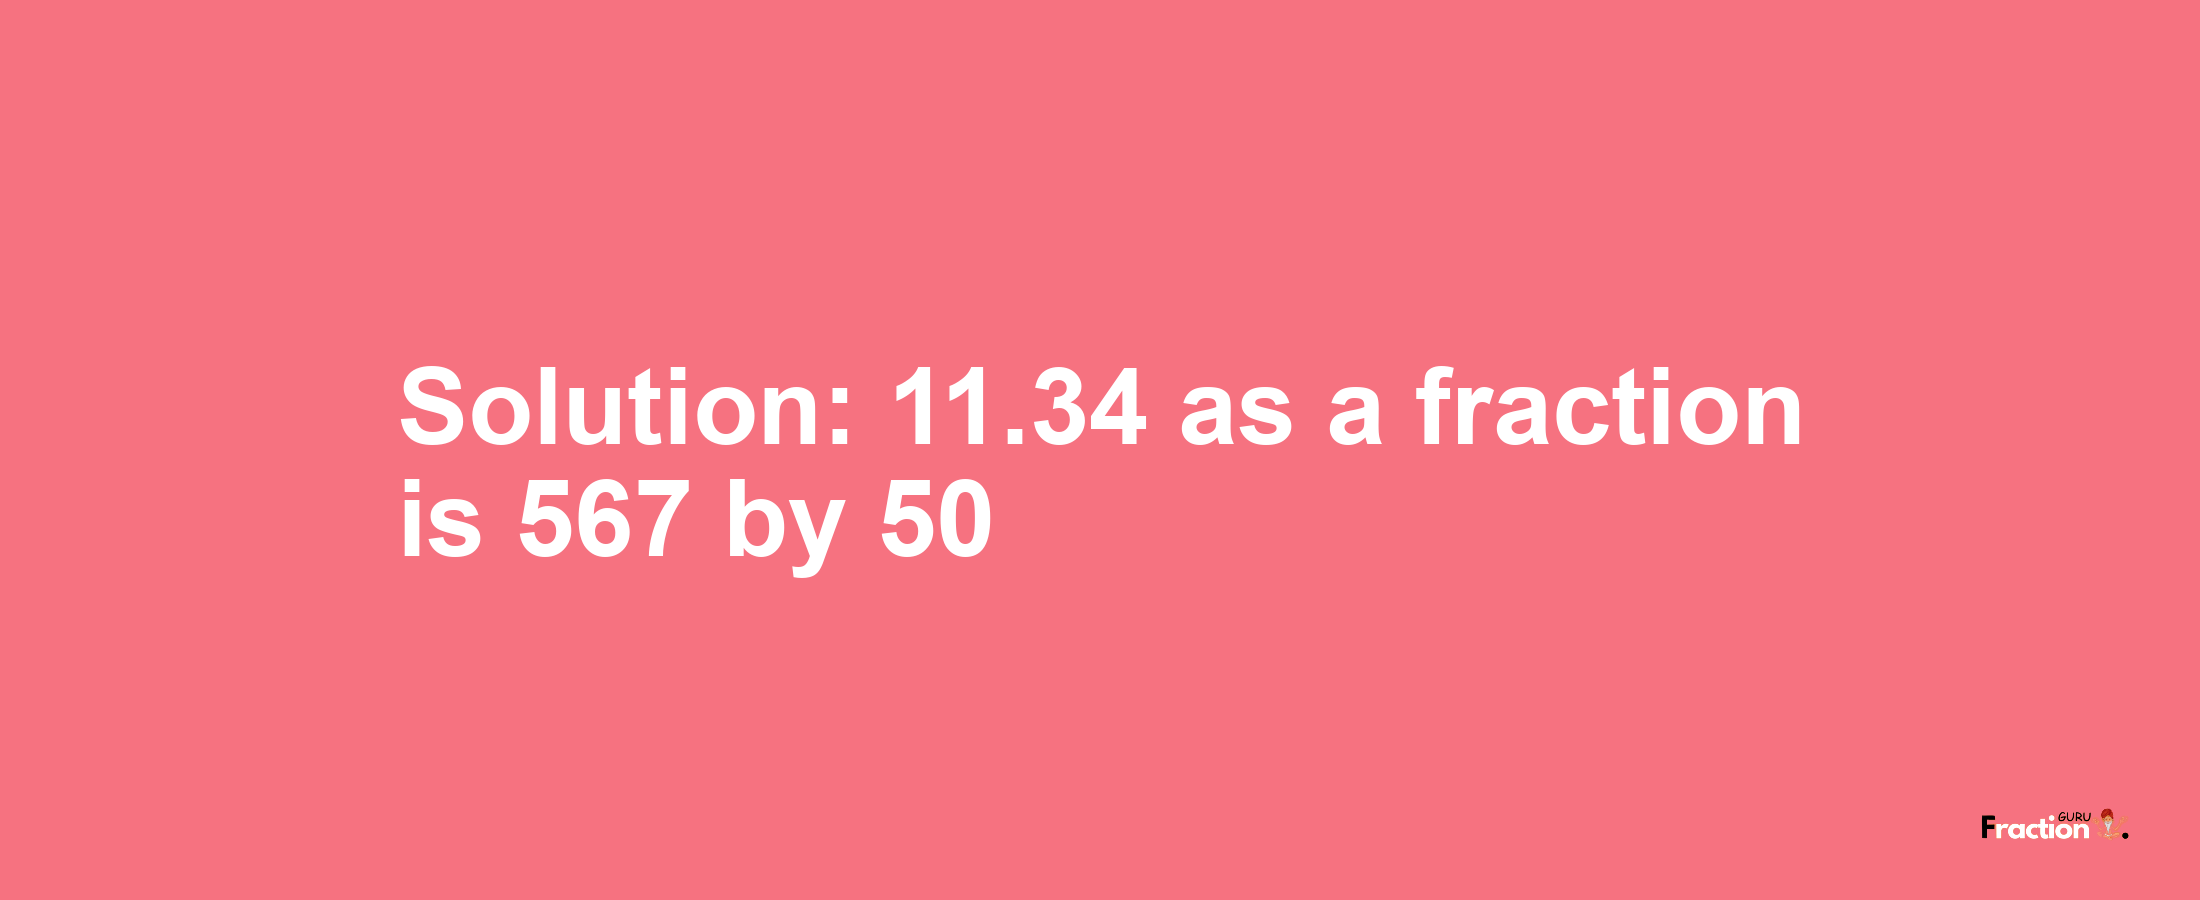 Solution:11.34 as a fraction is 567/50